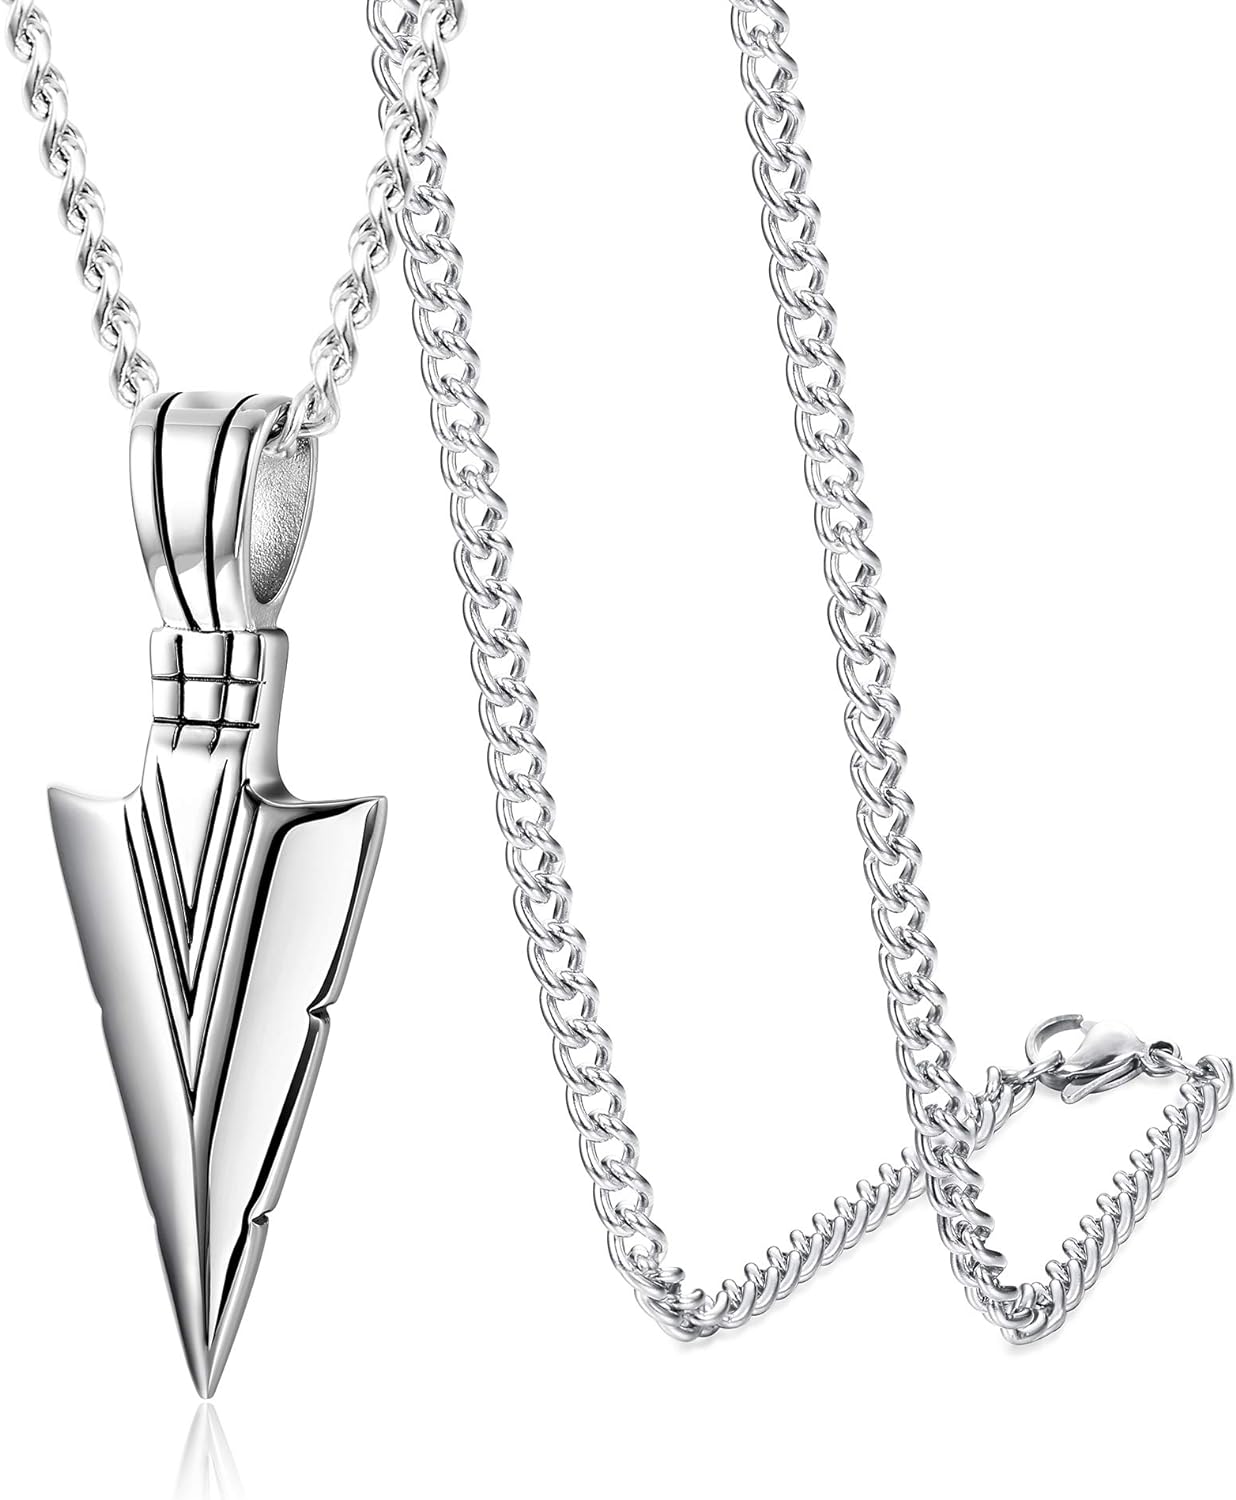 Jstyle Stainless Steel Pendant Necklace for Mens Boys Cool Spearpoint Arrowhead Pendant Chain Necklace Set